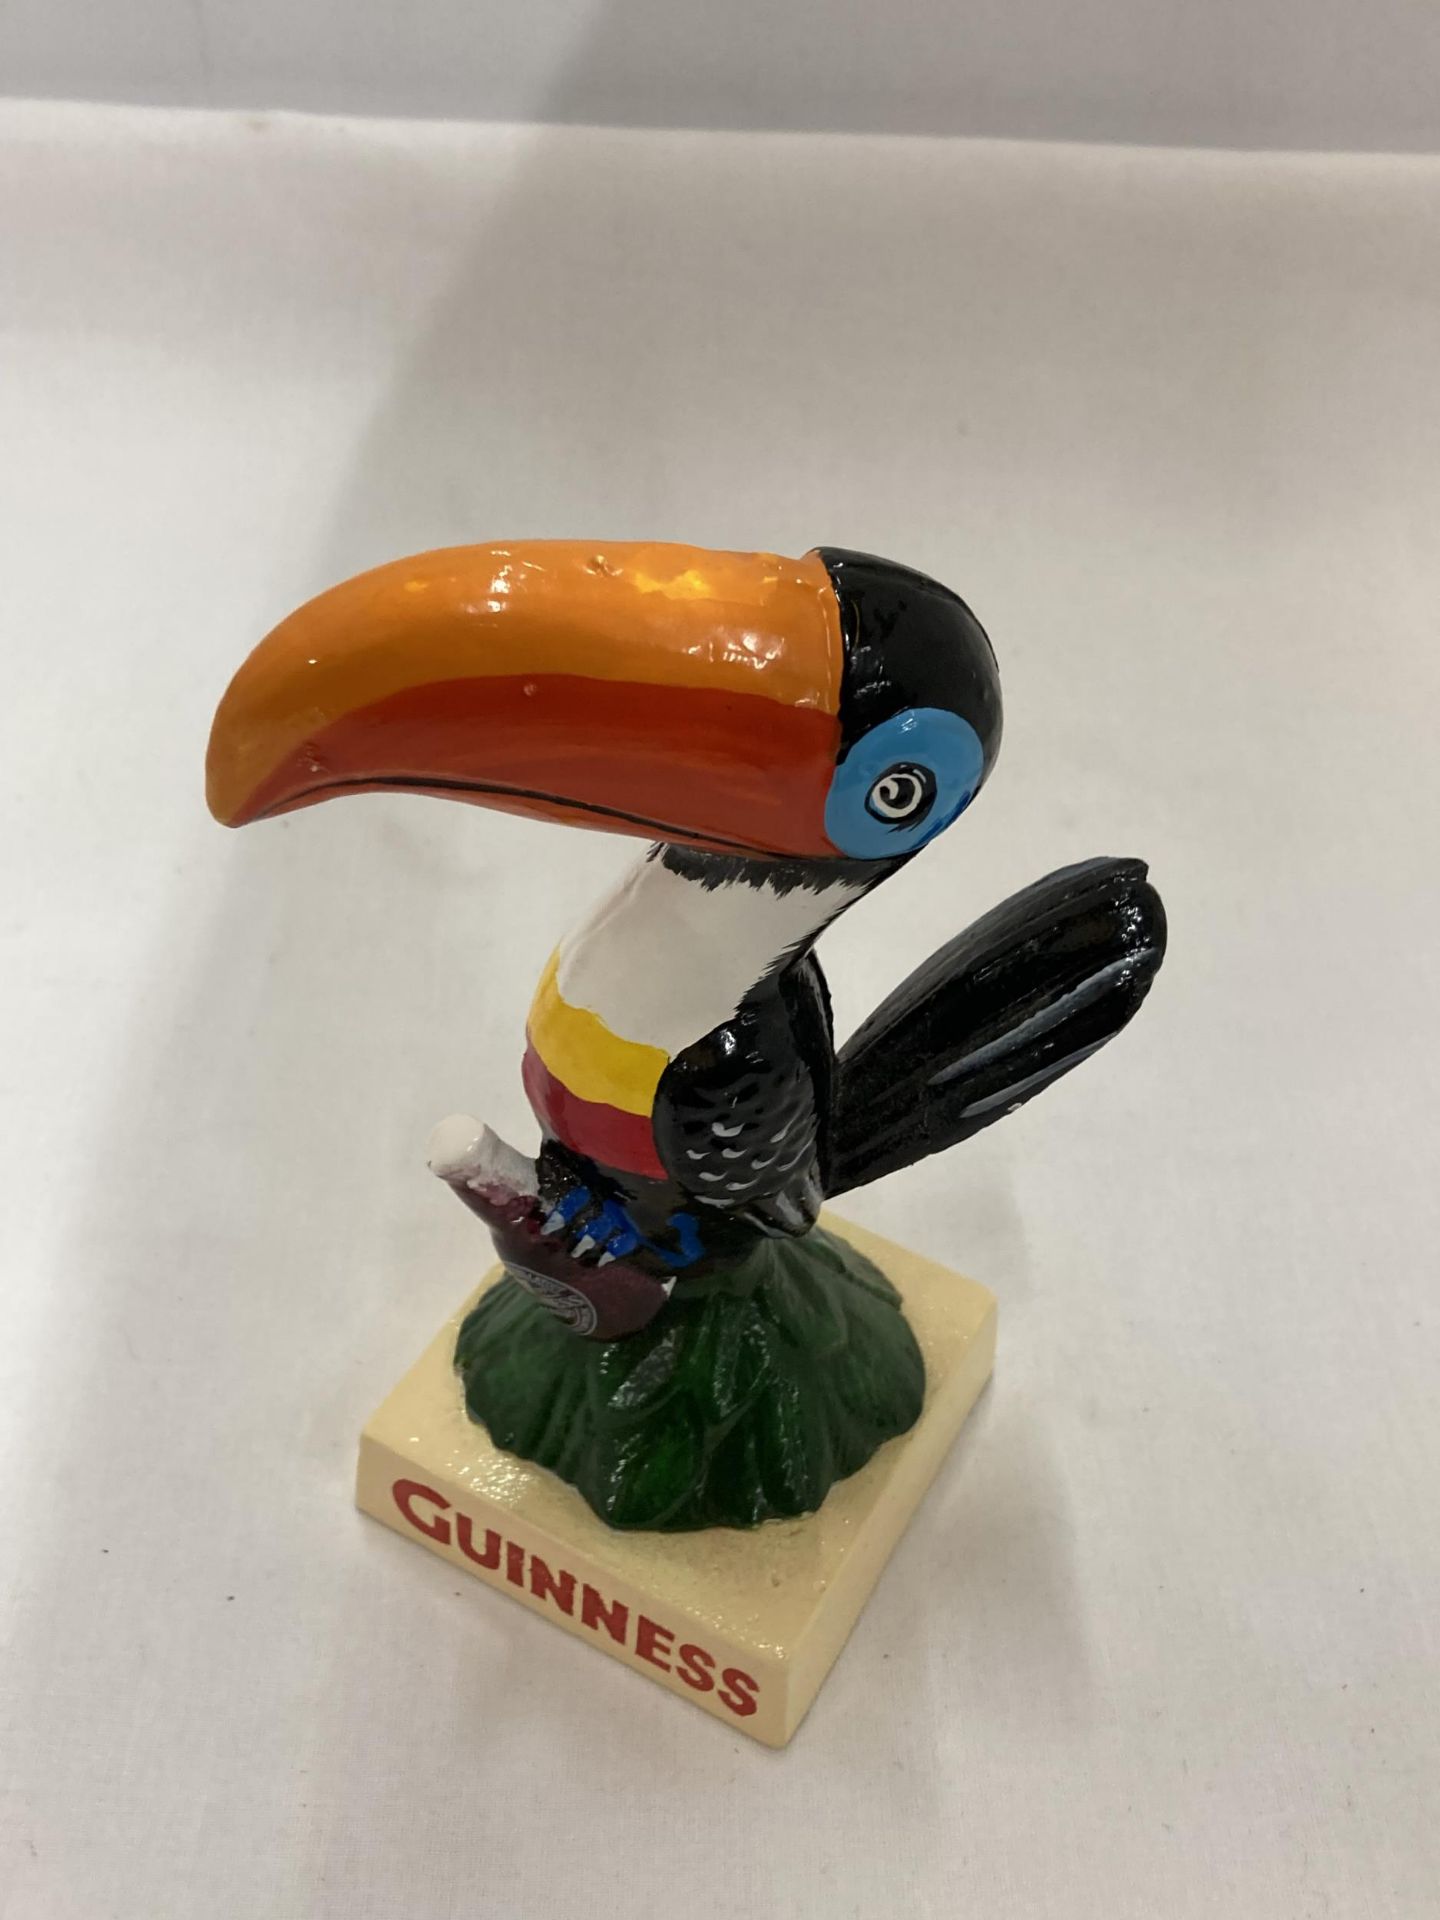 A CAST GUINNESS TOUCAN FIGURE, HEIGHT 17CM - Image 2 of 3